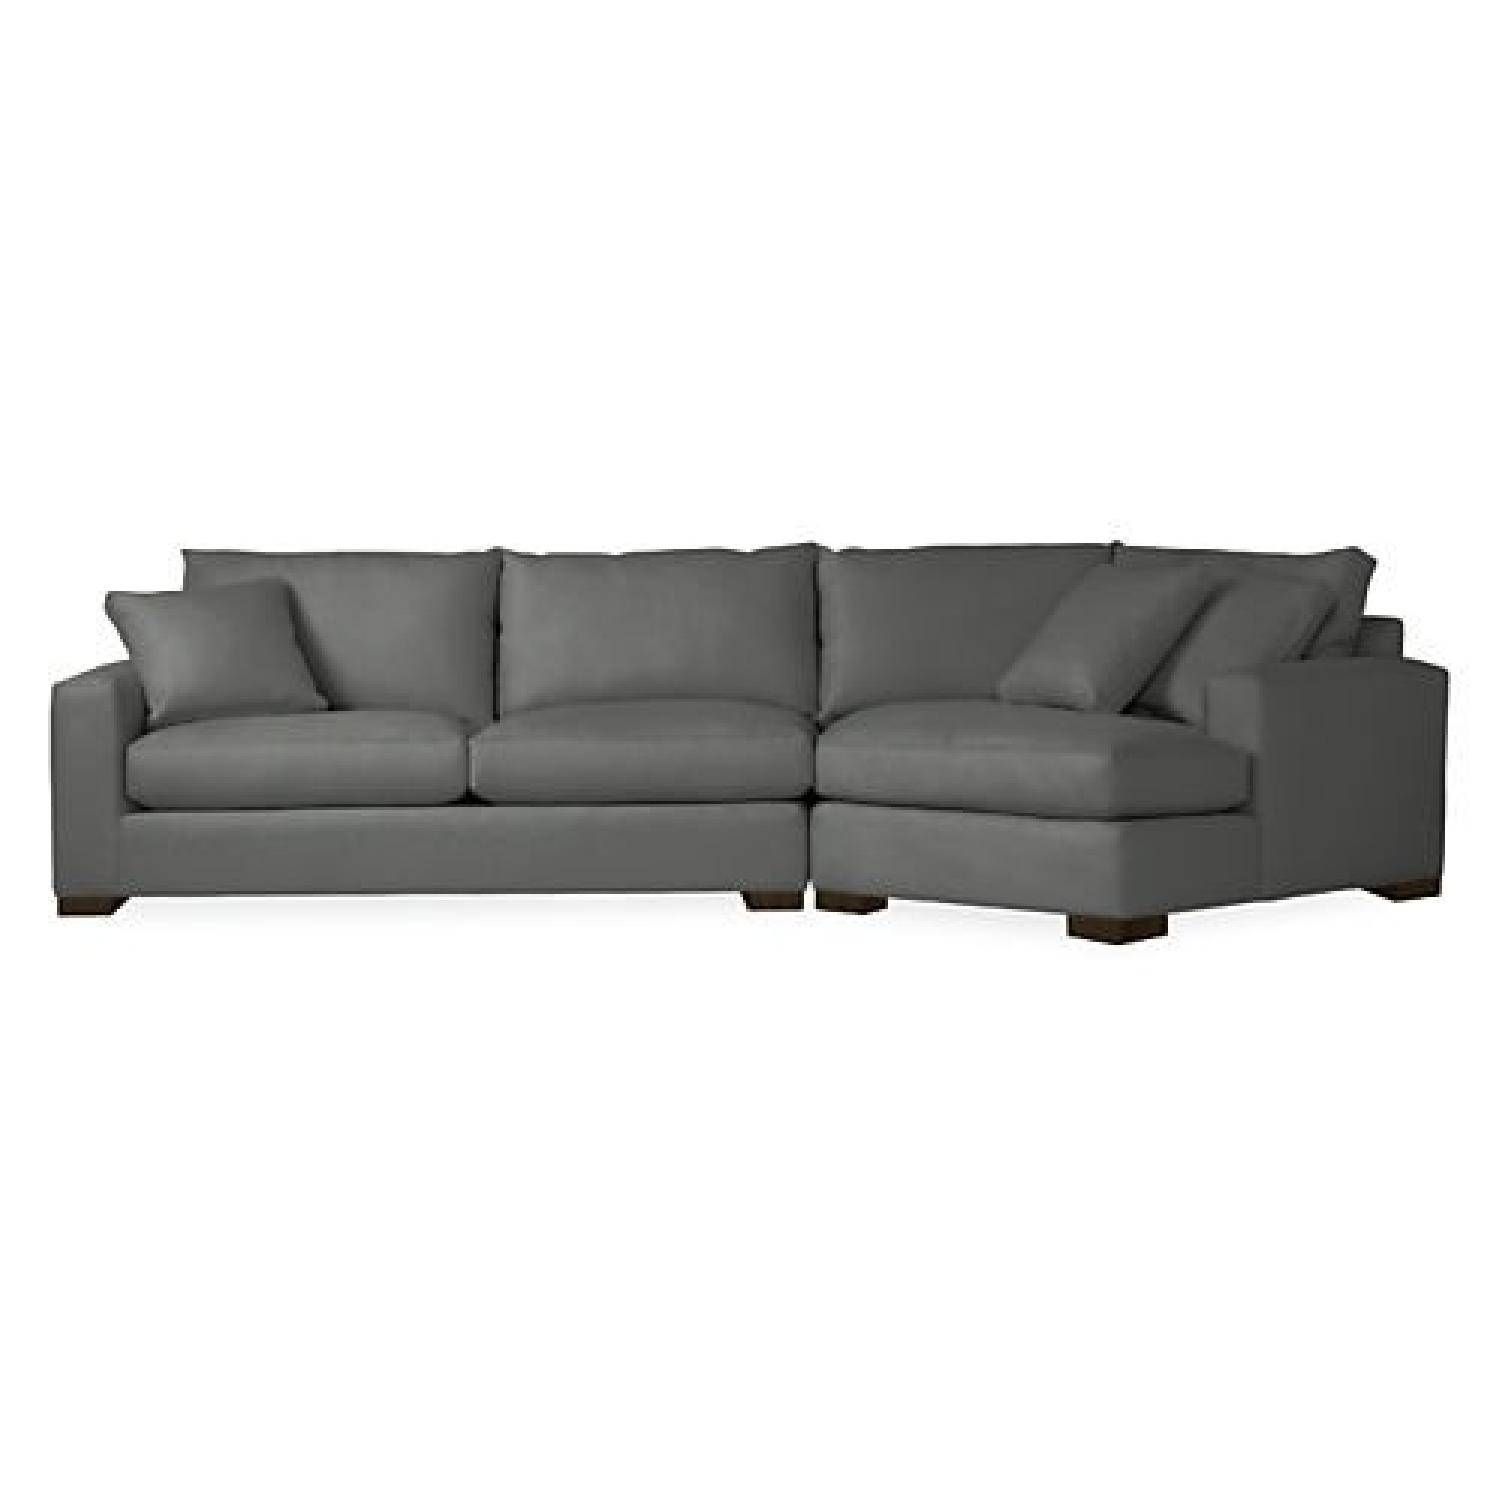 Room & Board Metro Sectional Sofa W/ Right Arm Angled – Aptdeco Throughout Angled Chaise Sofa (View 16 of 30)